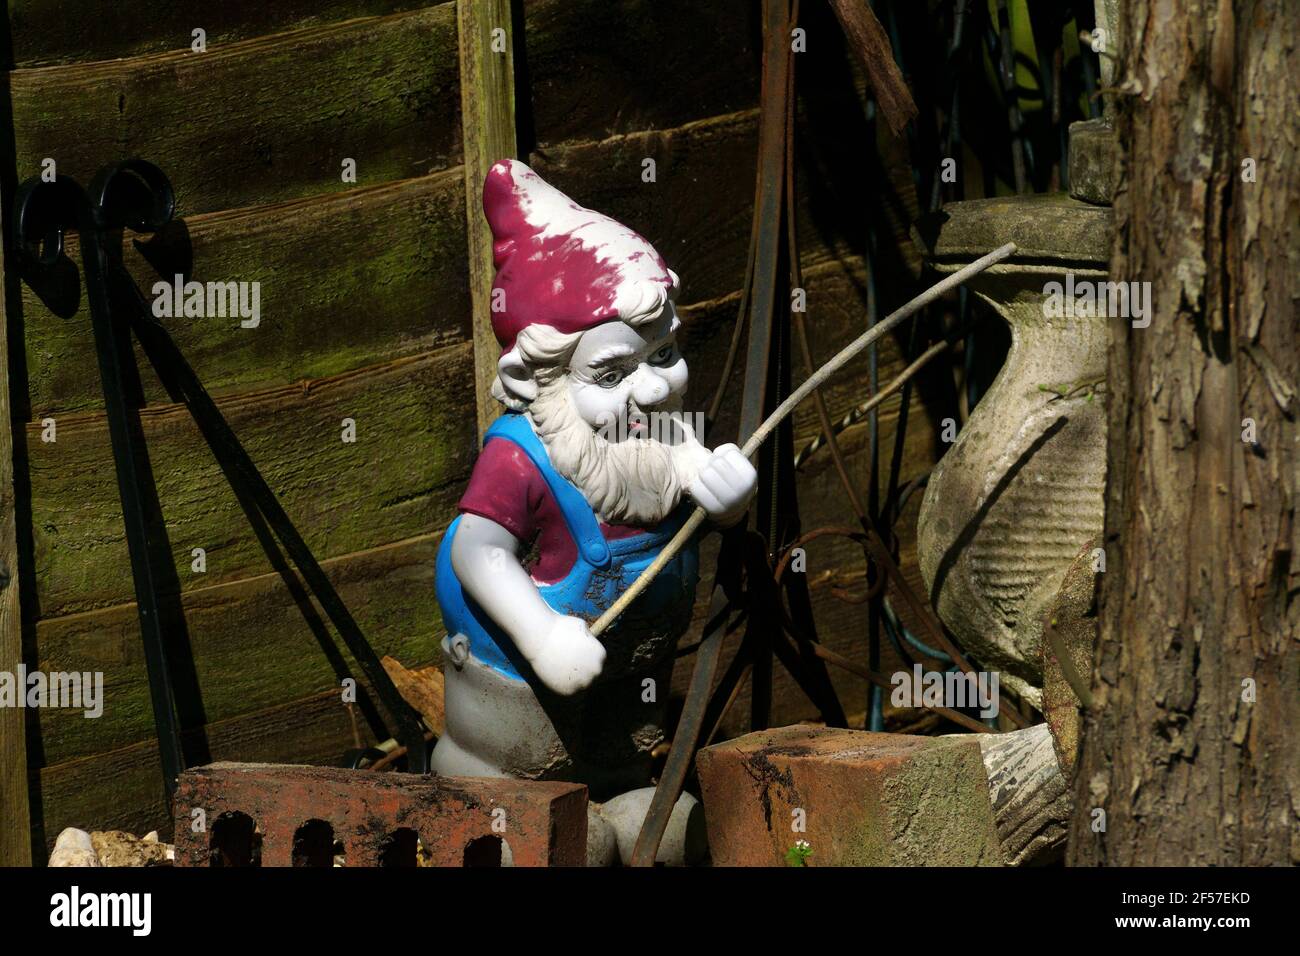 GNOME FISHING IN THE GARDEN Stock Photo